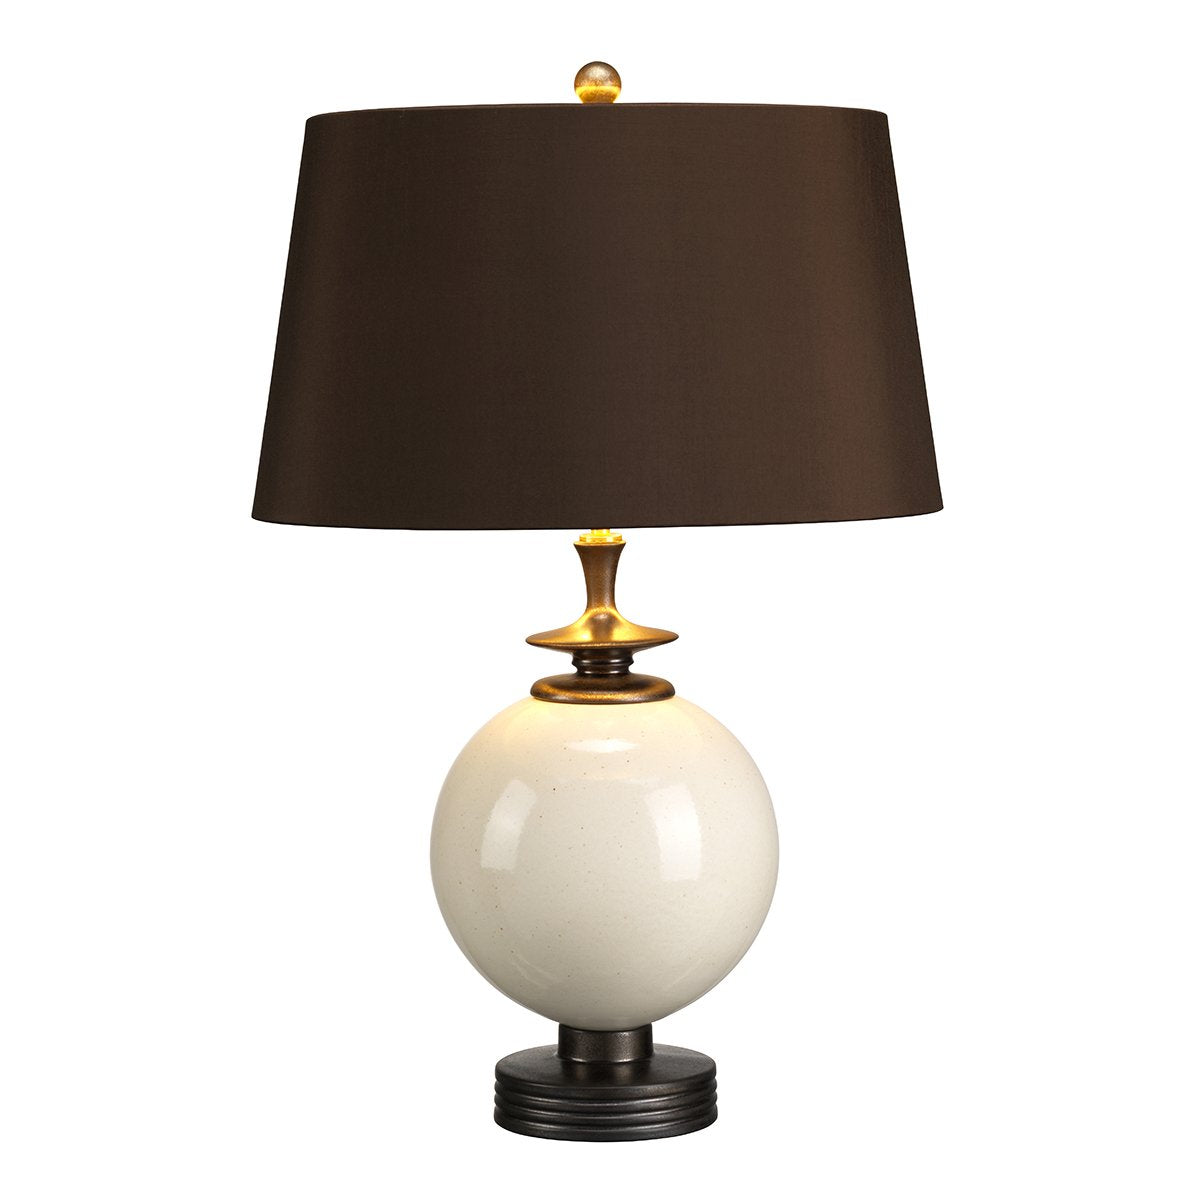 Colindale Orb Table Lamp c/w Shade - ID 8331